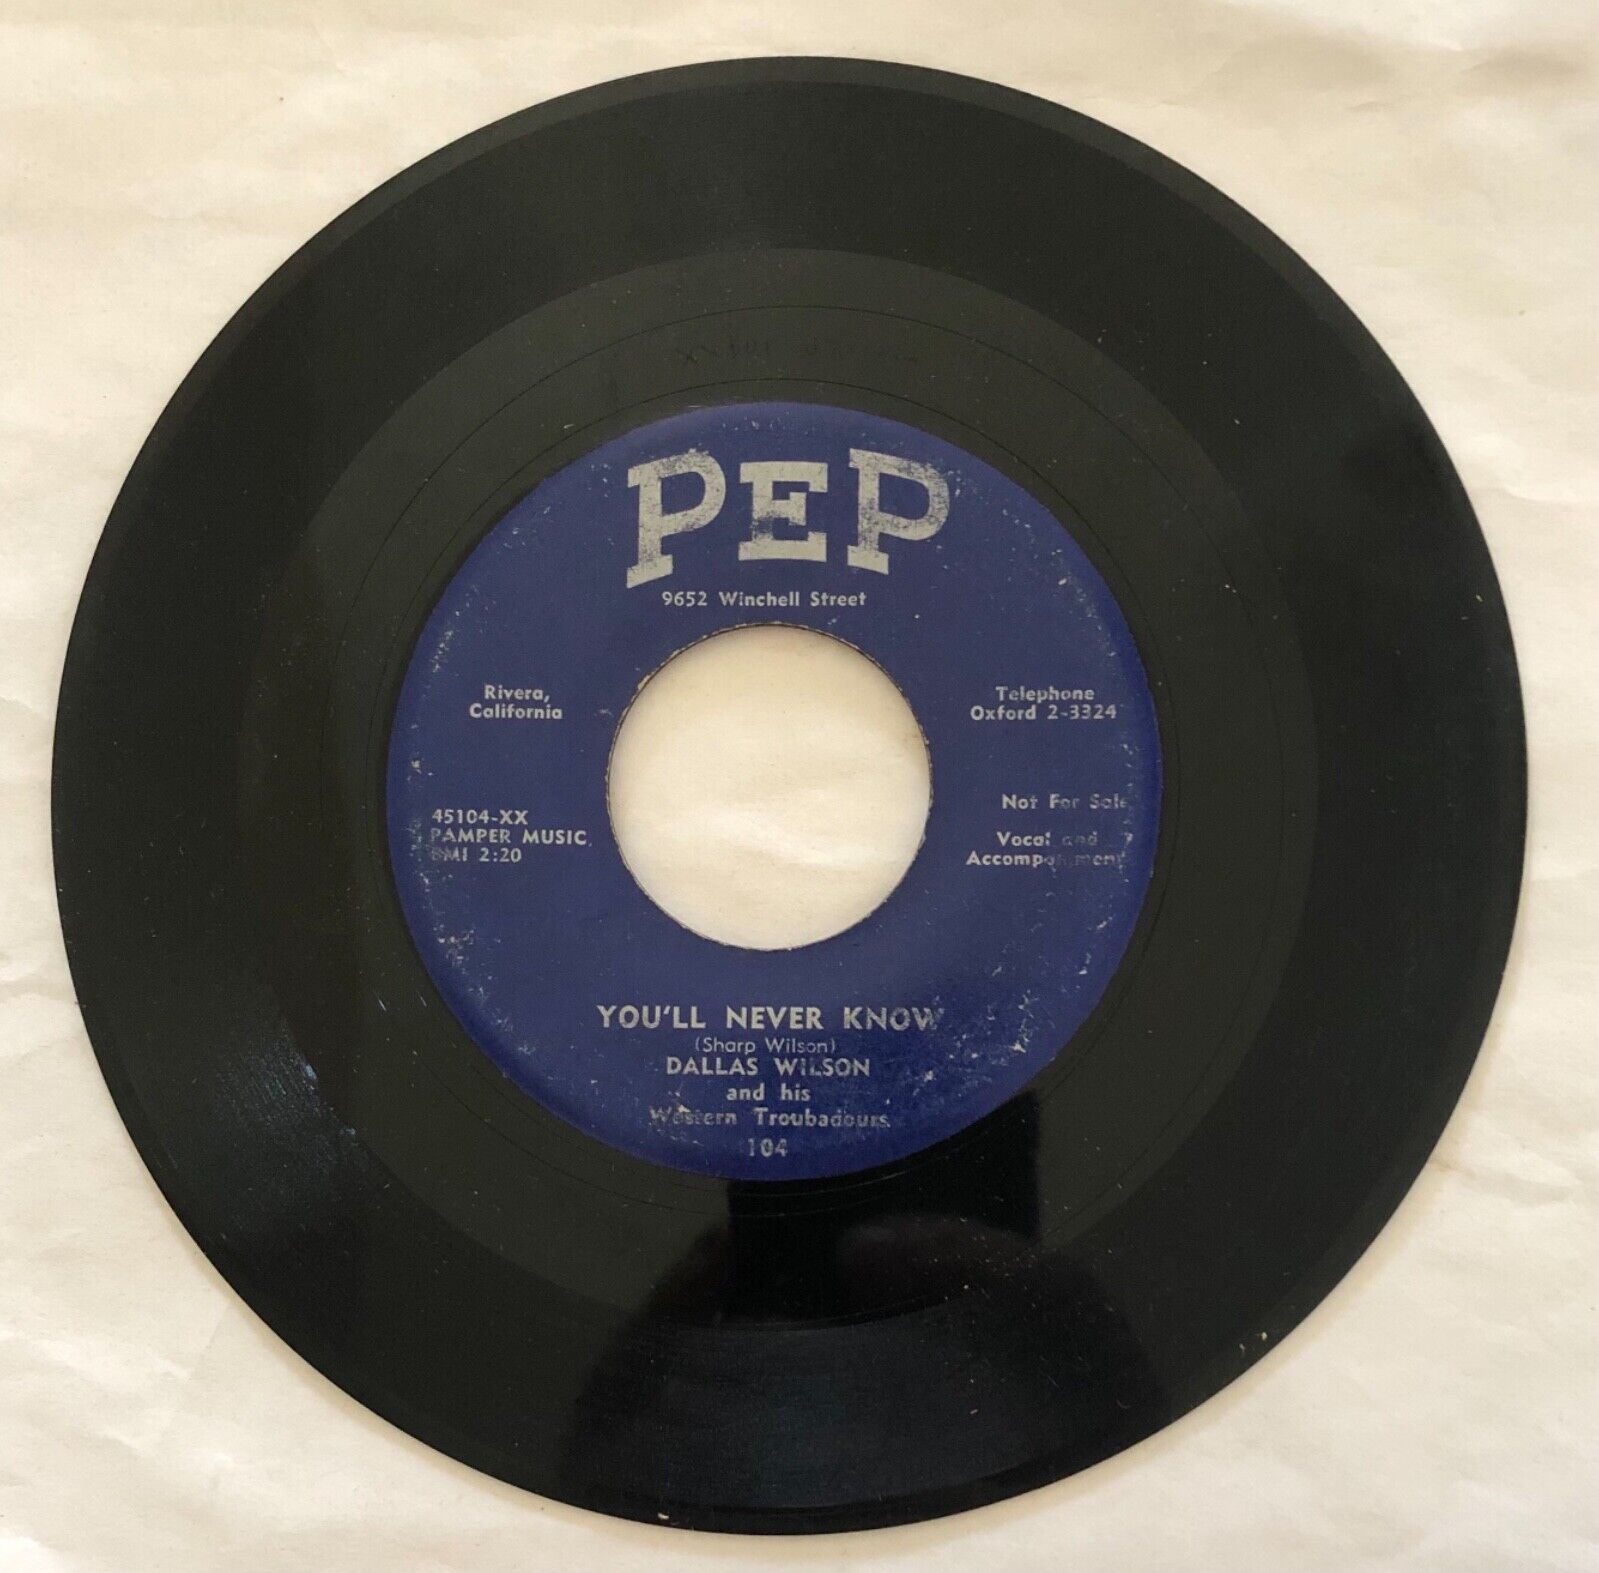 Dallas Wilson - You'll Never Know / The Fire Has Done Gone Out 45 rpm 7” Record